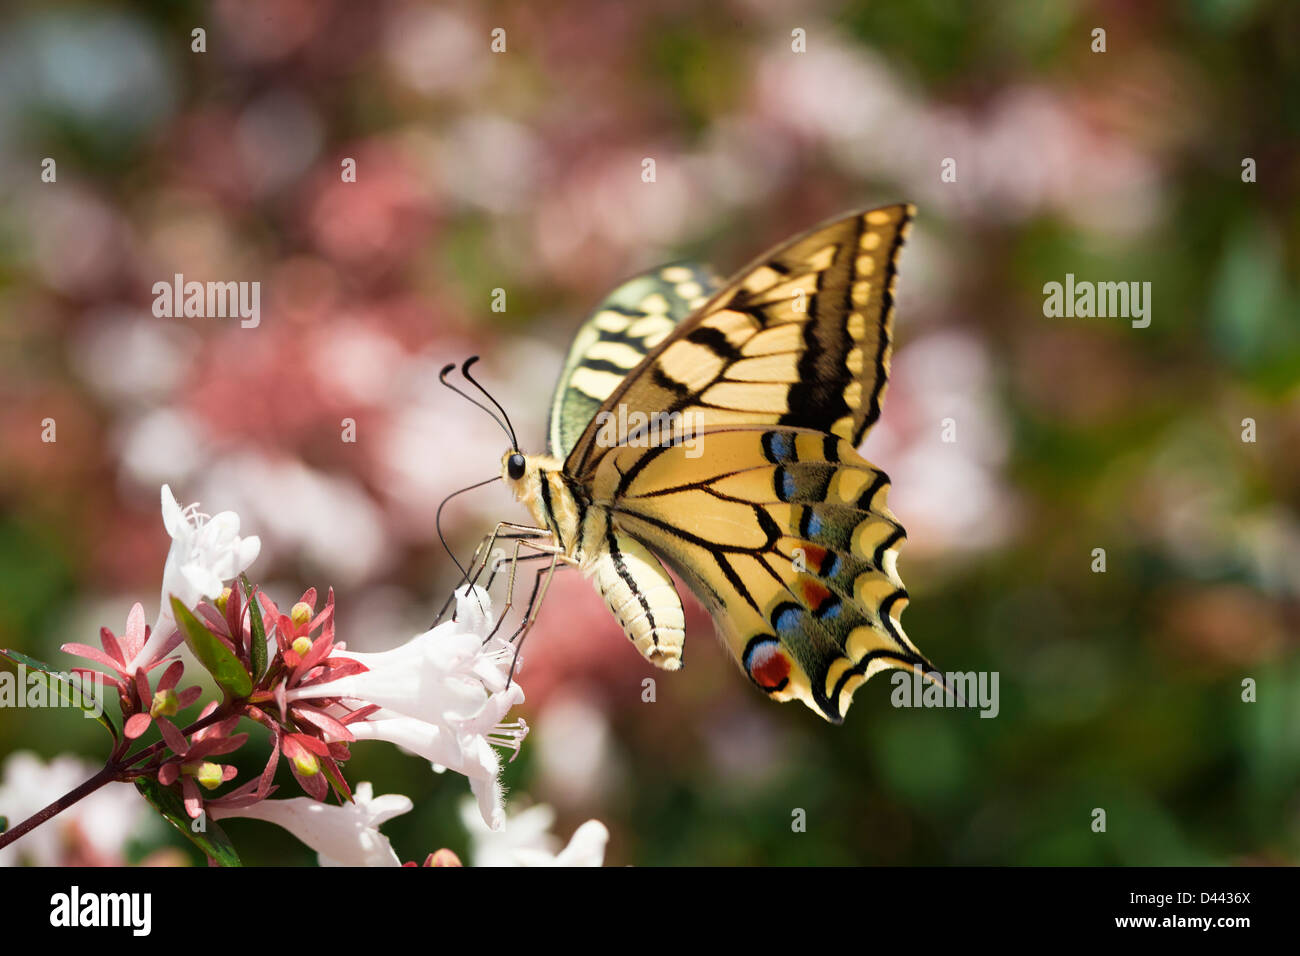 Yellow swallowtail butterfly (lepidoptera) sucking nectar from abelia flowers. Stock Photo